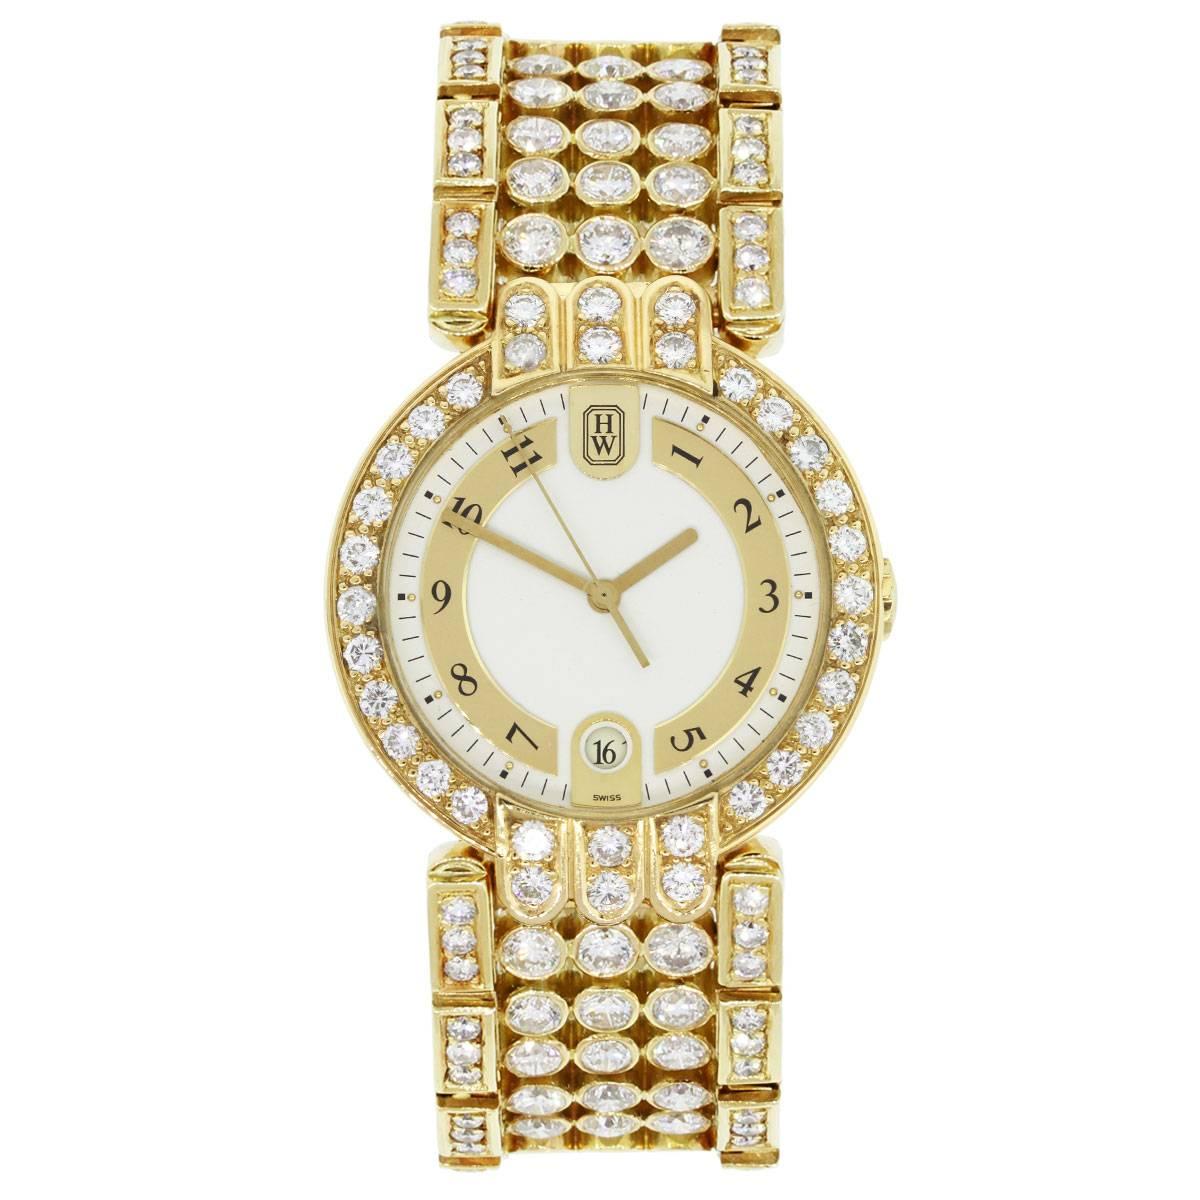 Brand: Harry Winston
MPN: MQ 34 GL
Model: Premier
Case Material: 18k Yellow Gold
Case Diameter: 34mm
Crystal: Sapphire
Bezel: Diamond bezel (aftermarket)
Dial: Two tone matte cream and gold color dial with date window at 6 o'clock